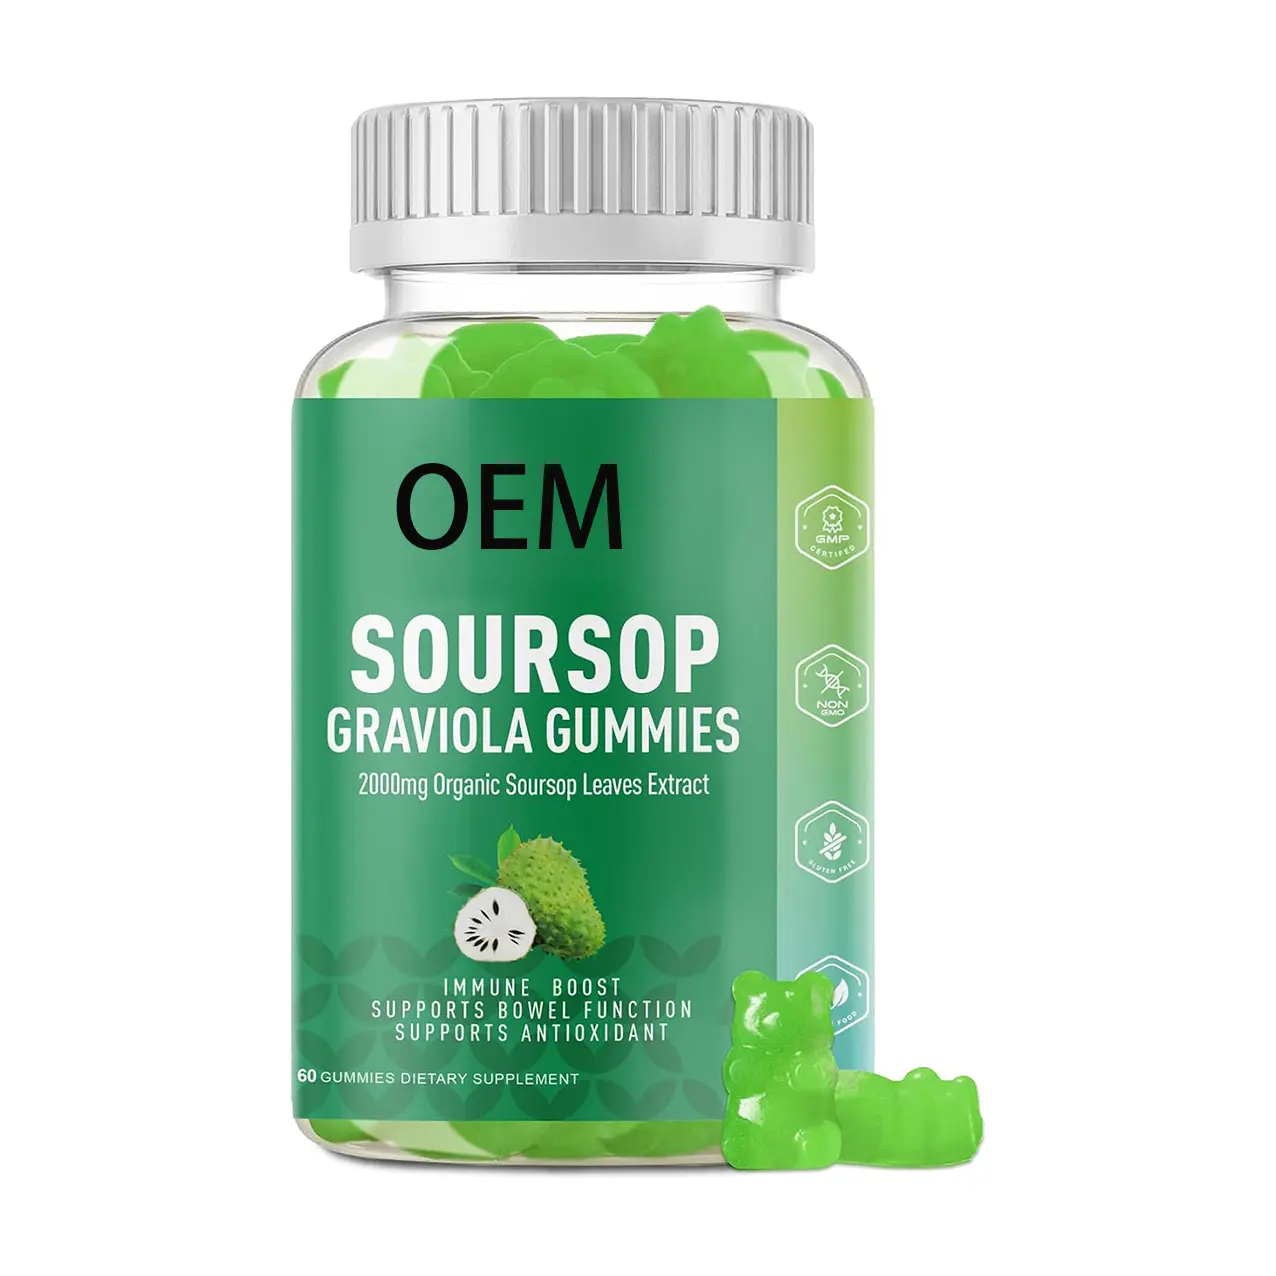 Private Label Organic Soursop Extract Supplement Organic Soursop Graviola Gummies for mmune Support and Antioxidant